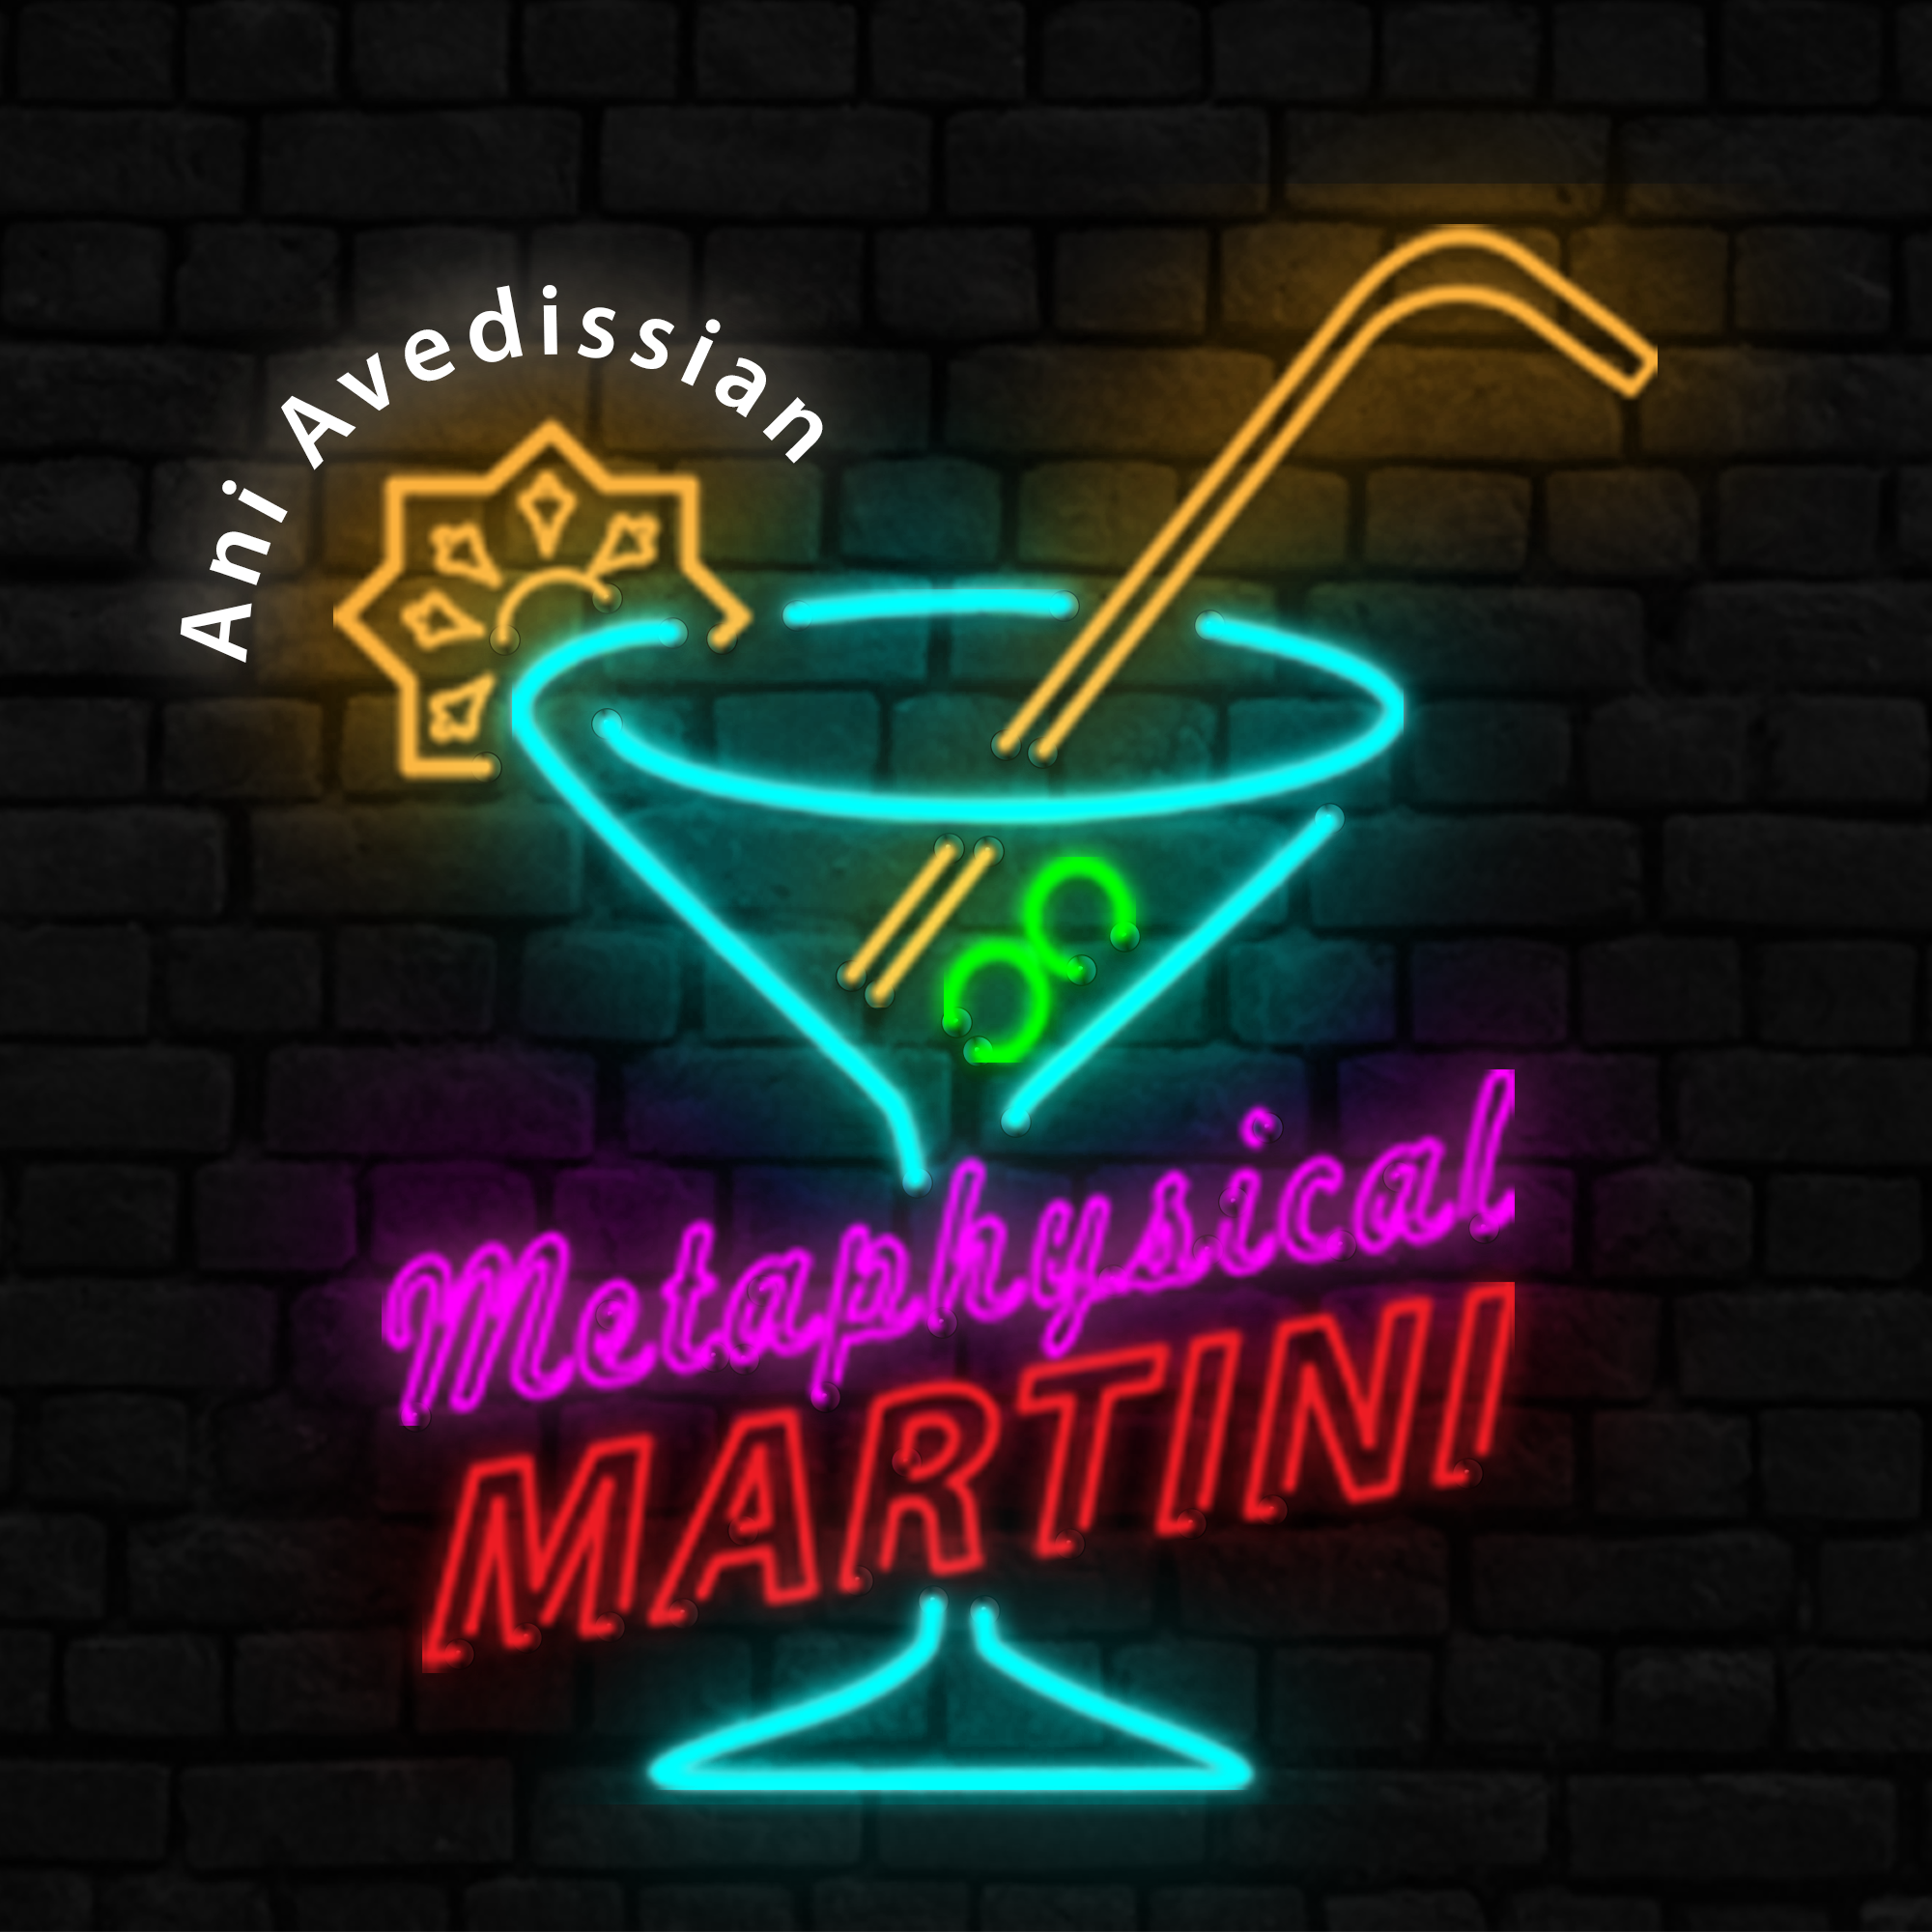 "Metaphysical Martini" 07/21/2021 - Don't cry over the apple pie...it's still baking.